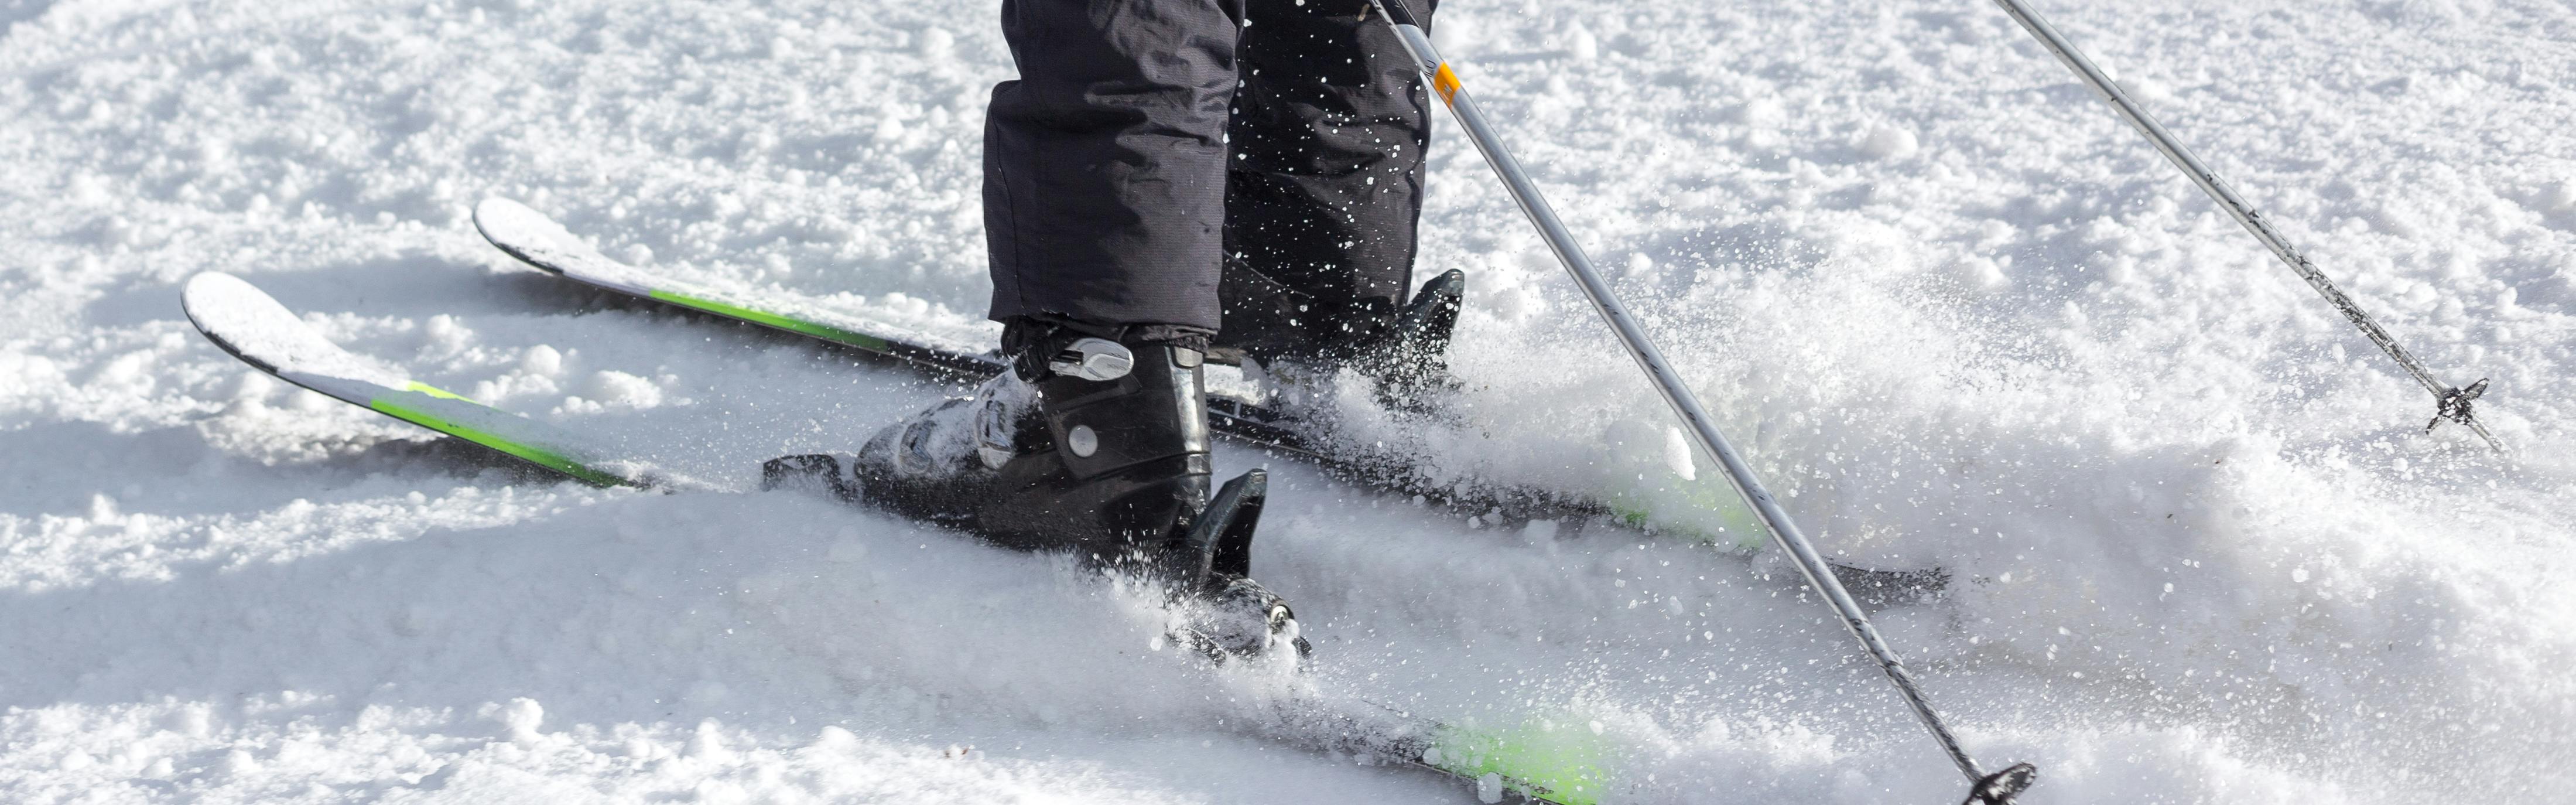 Foot Pain in Skiing: 5 Reasons Your Ski Boots Might Hurt Your Feet